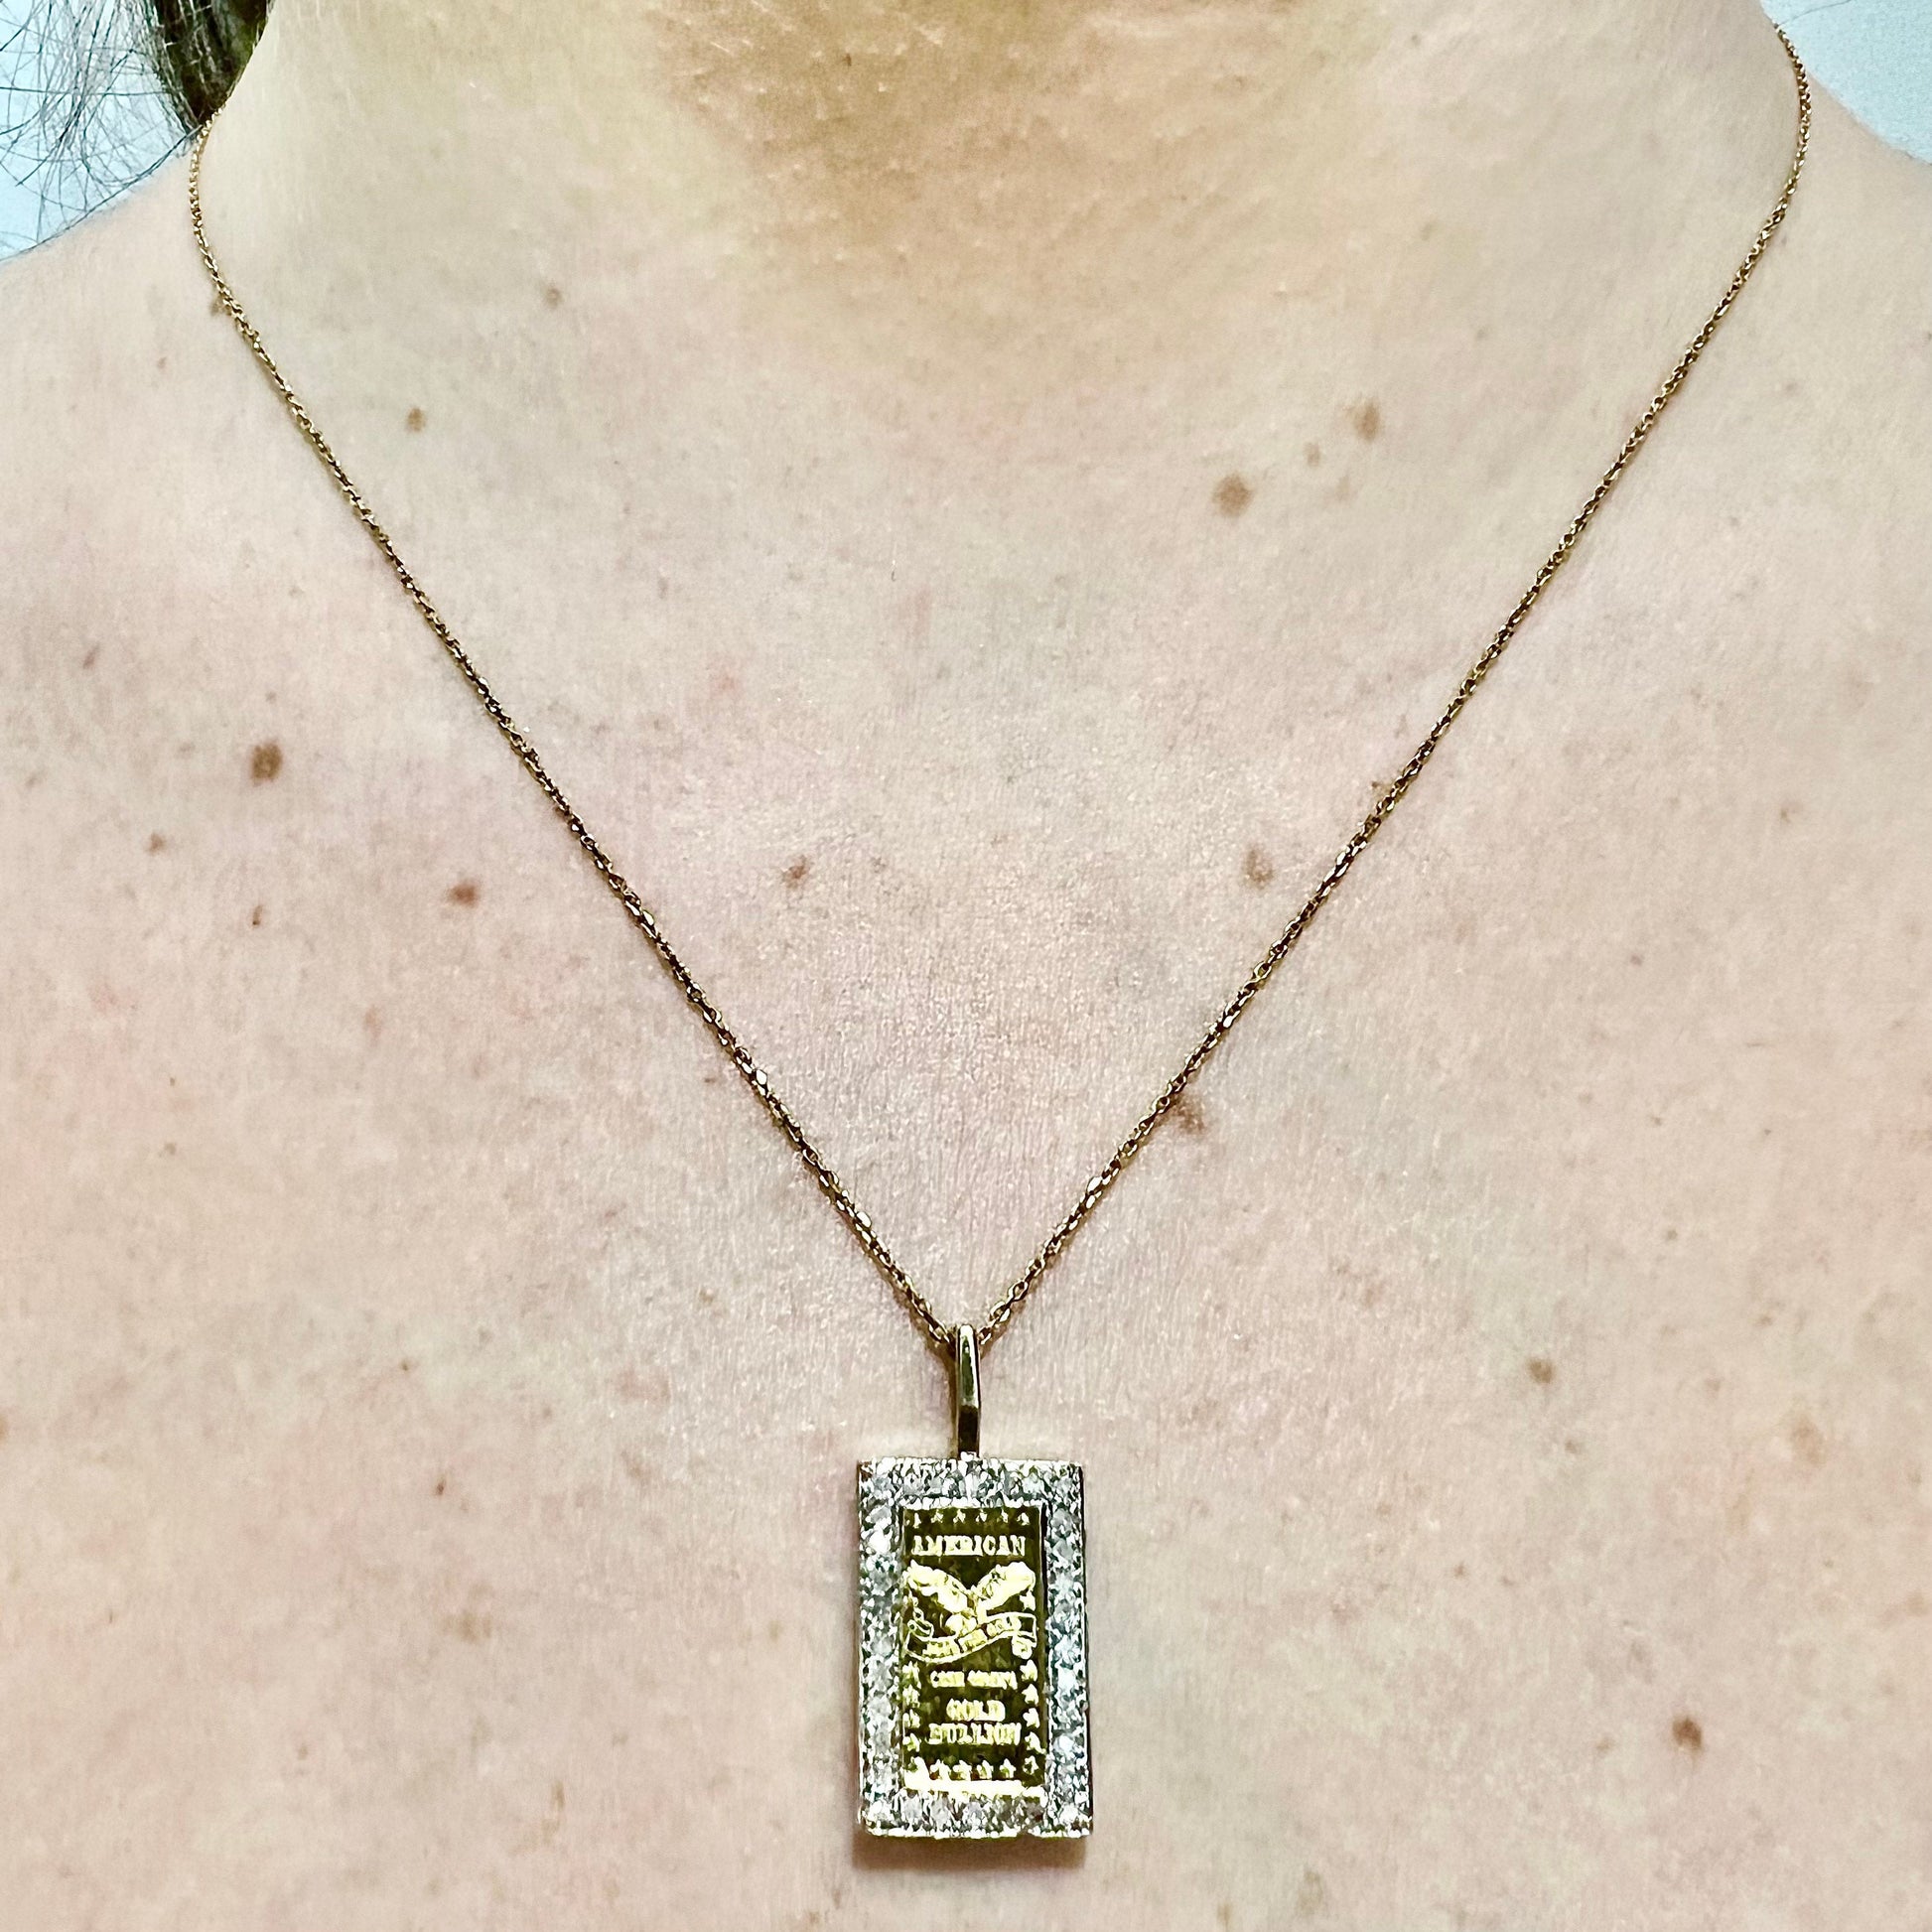 14K Solid Gold 1g Pure Gold Bar & Diamond Pendant Necklace - Two Tone Gold Bullion Pendant - Pure Gold Pendant - Best Gift For Her